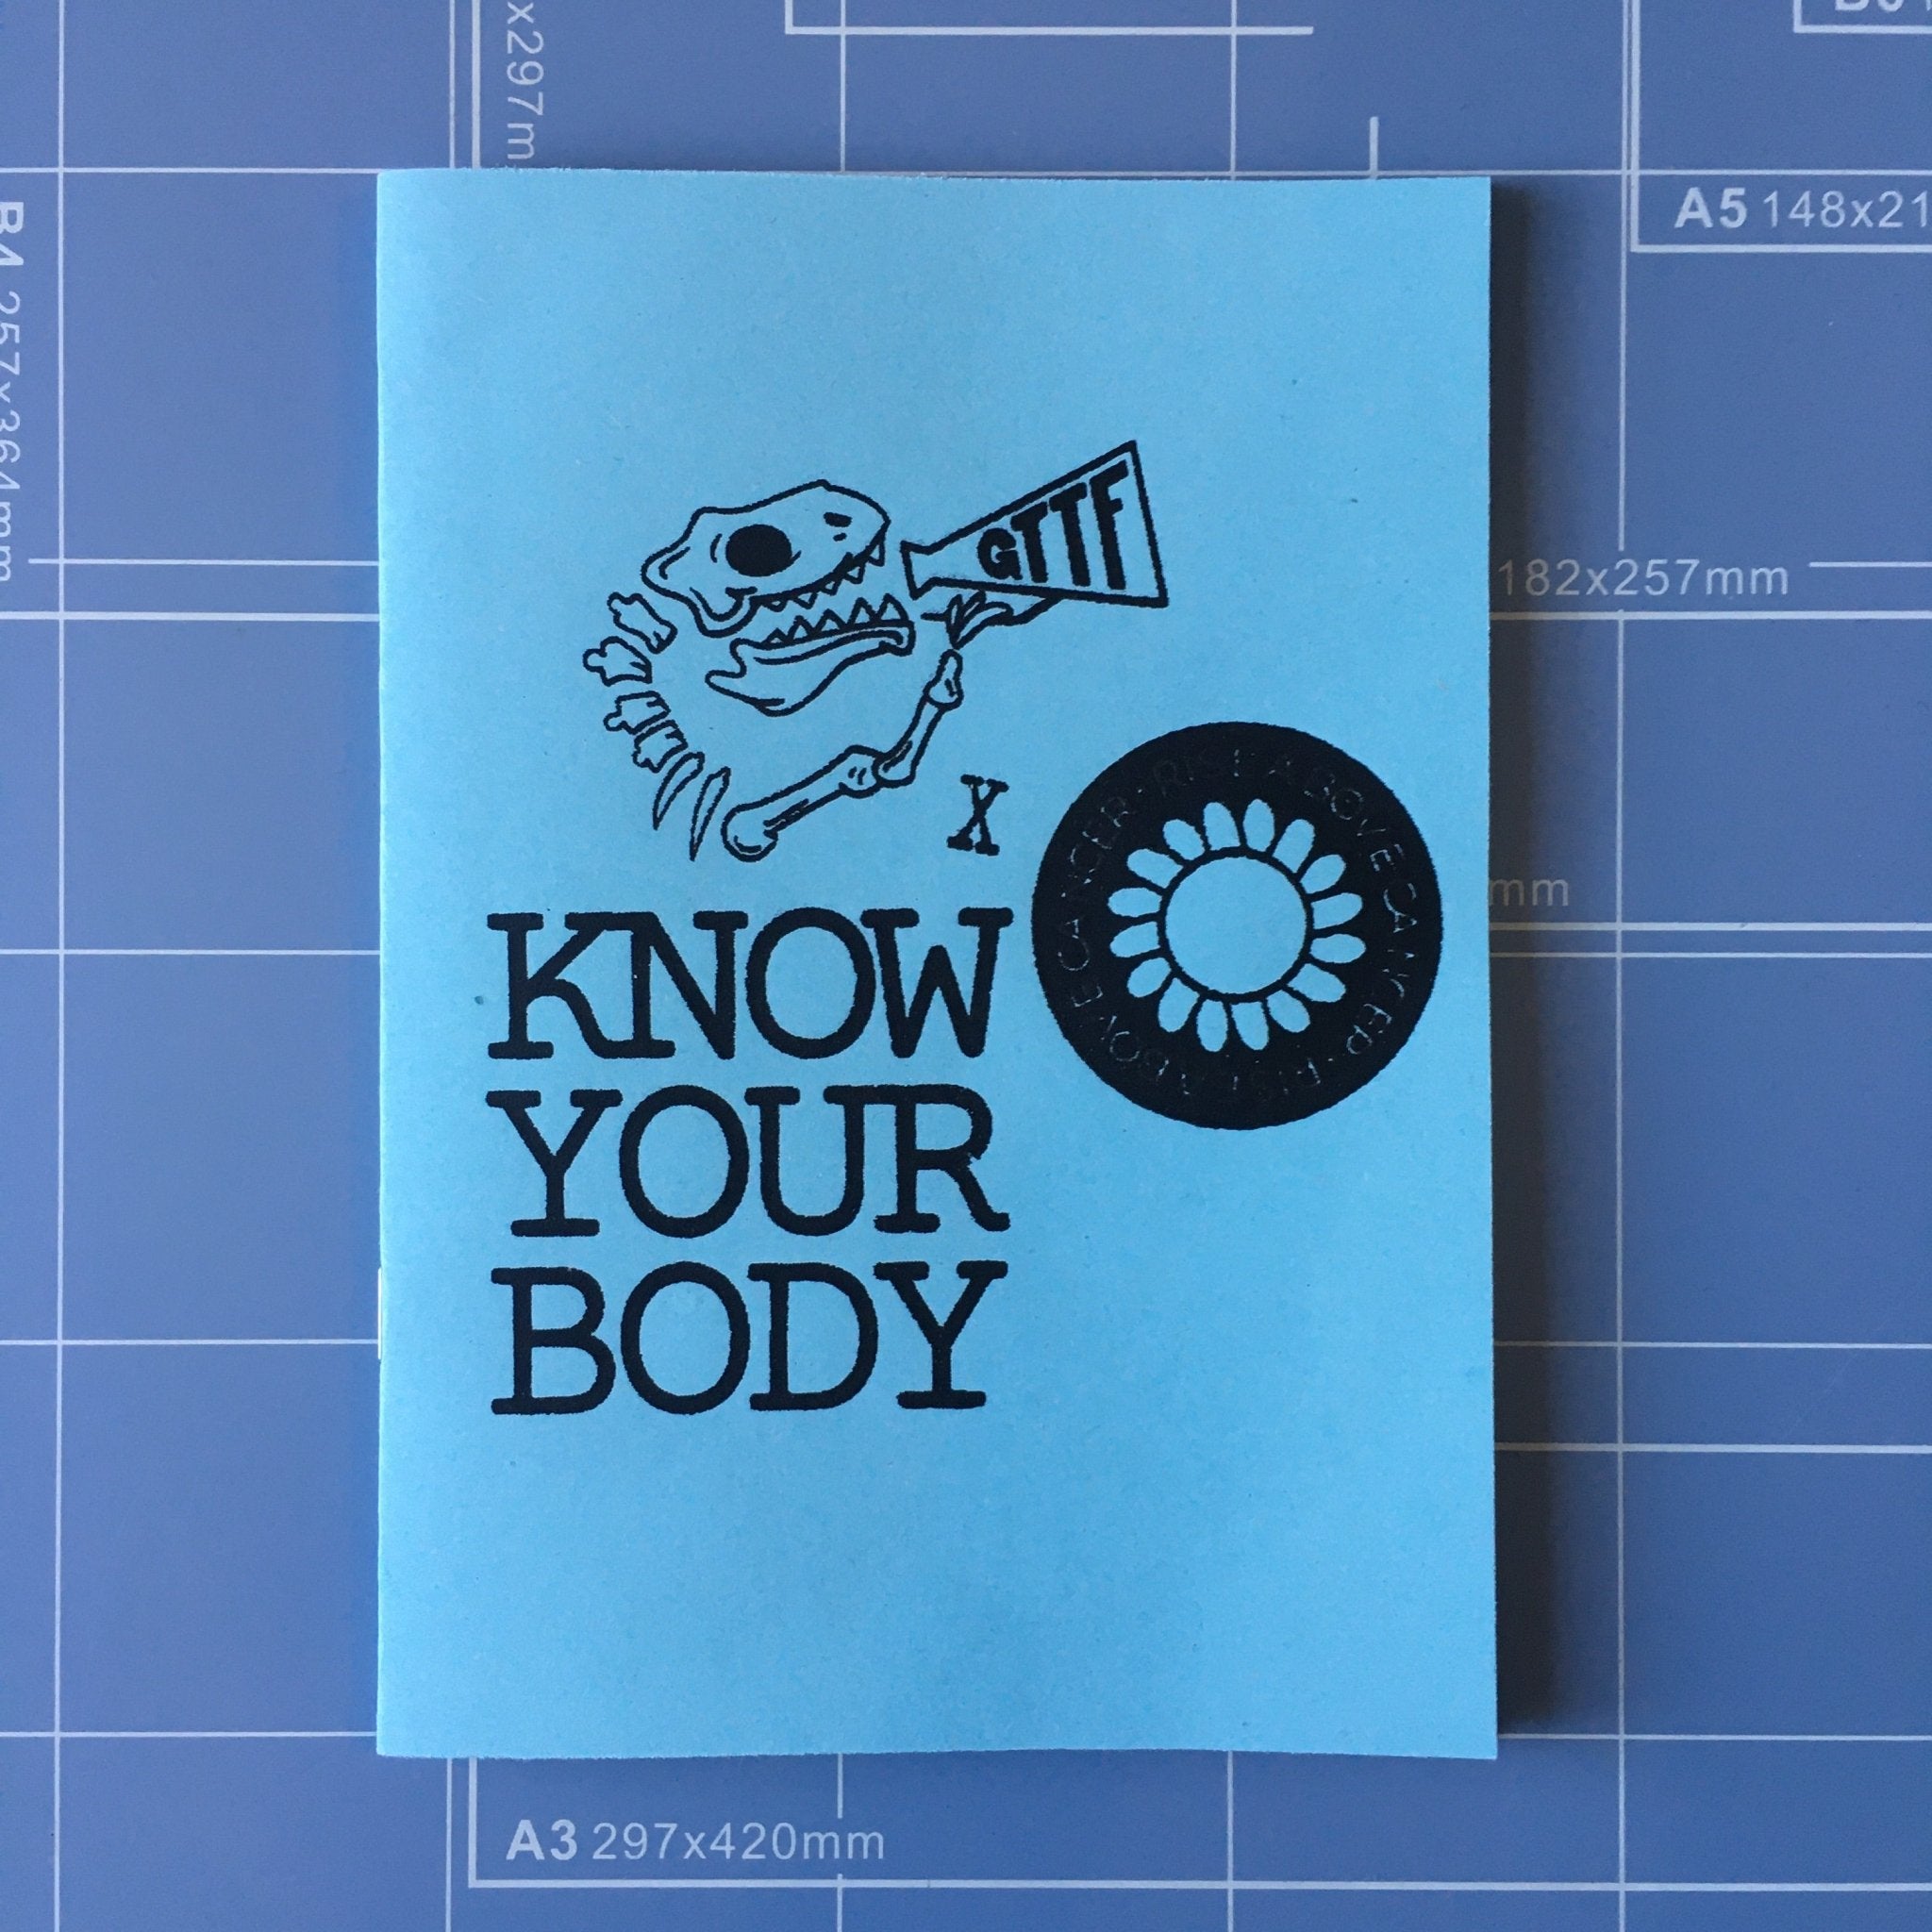 Know Your Body ZINE - Zine - Girls To The Front